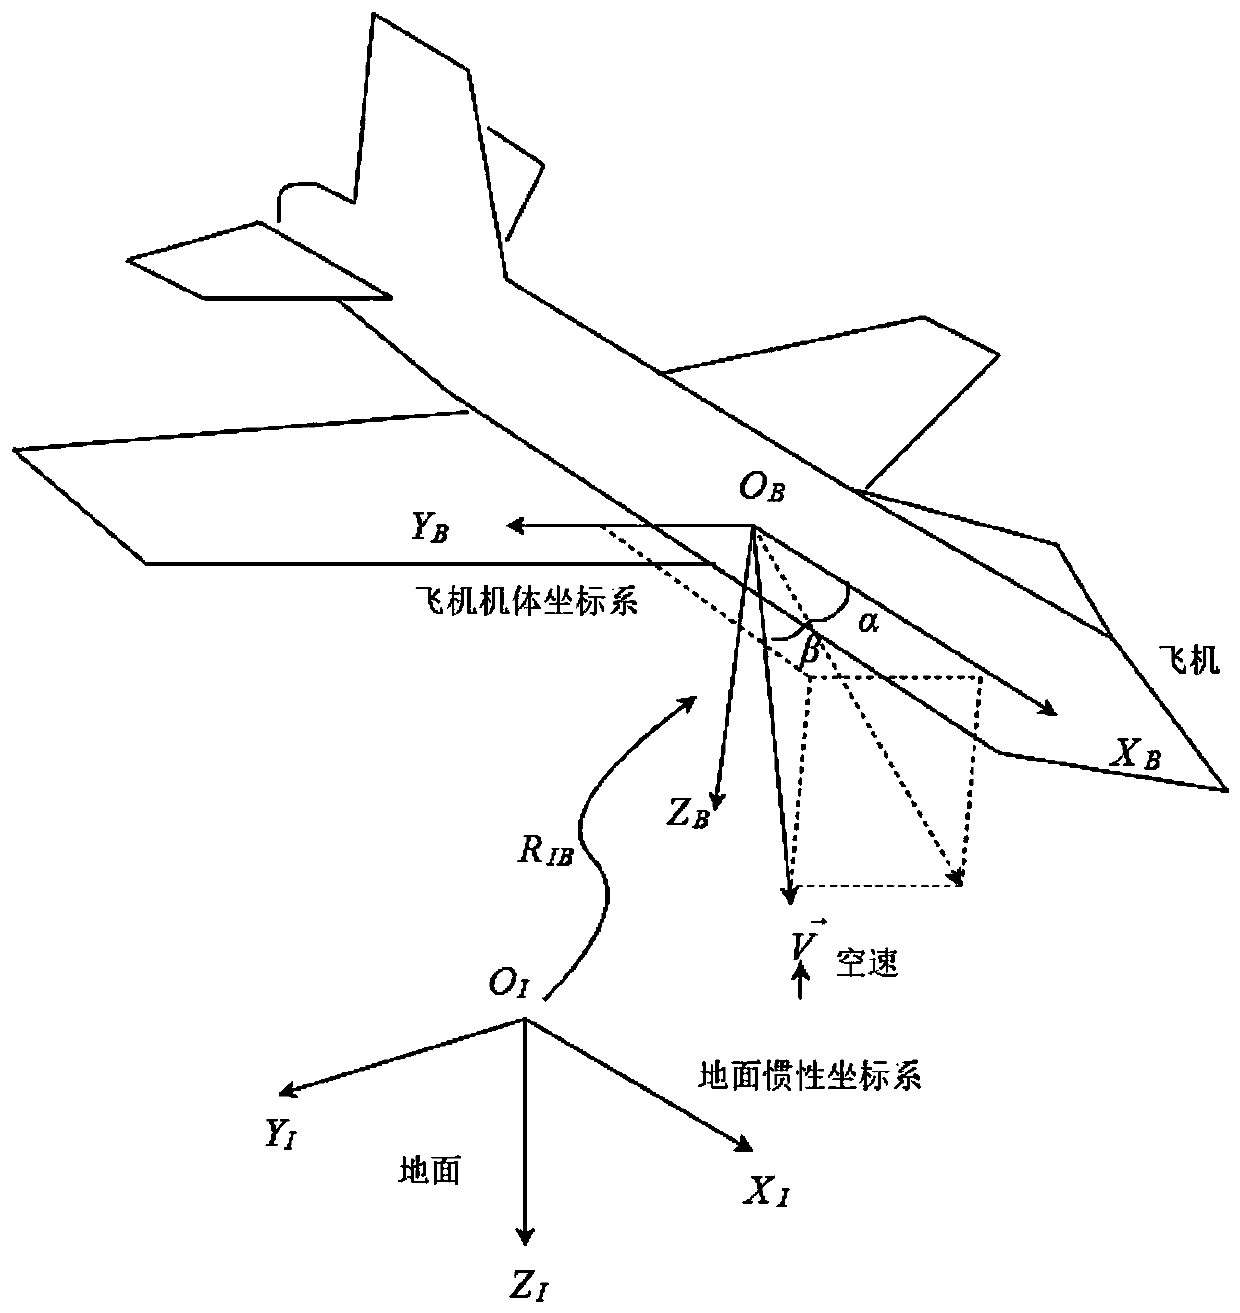 Aircraft stress simulation method used in flight stall state